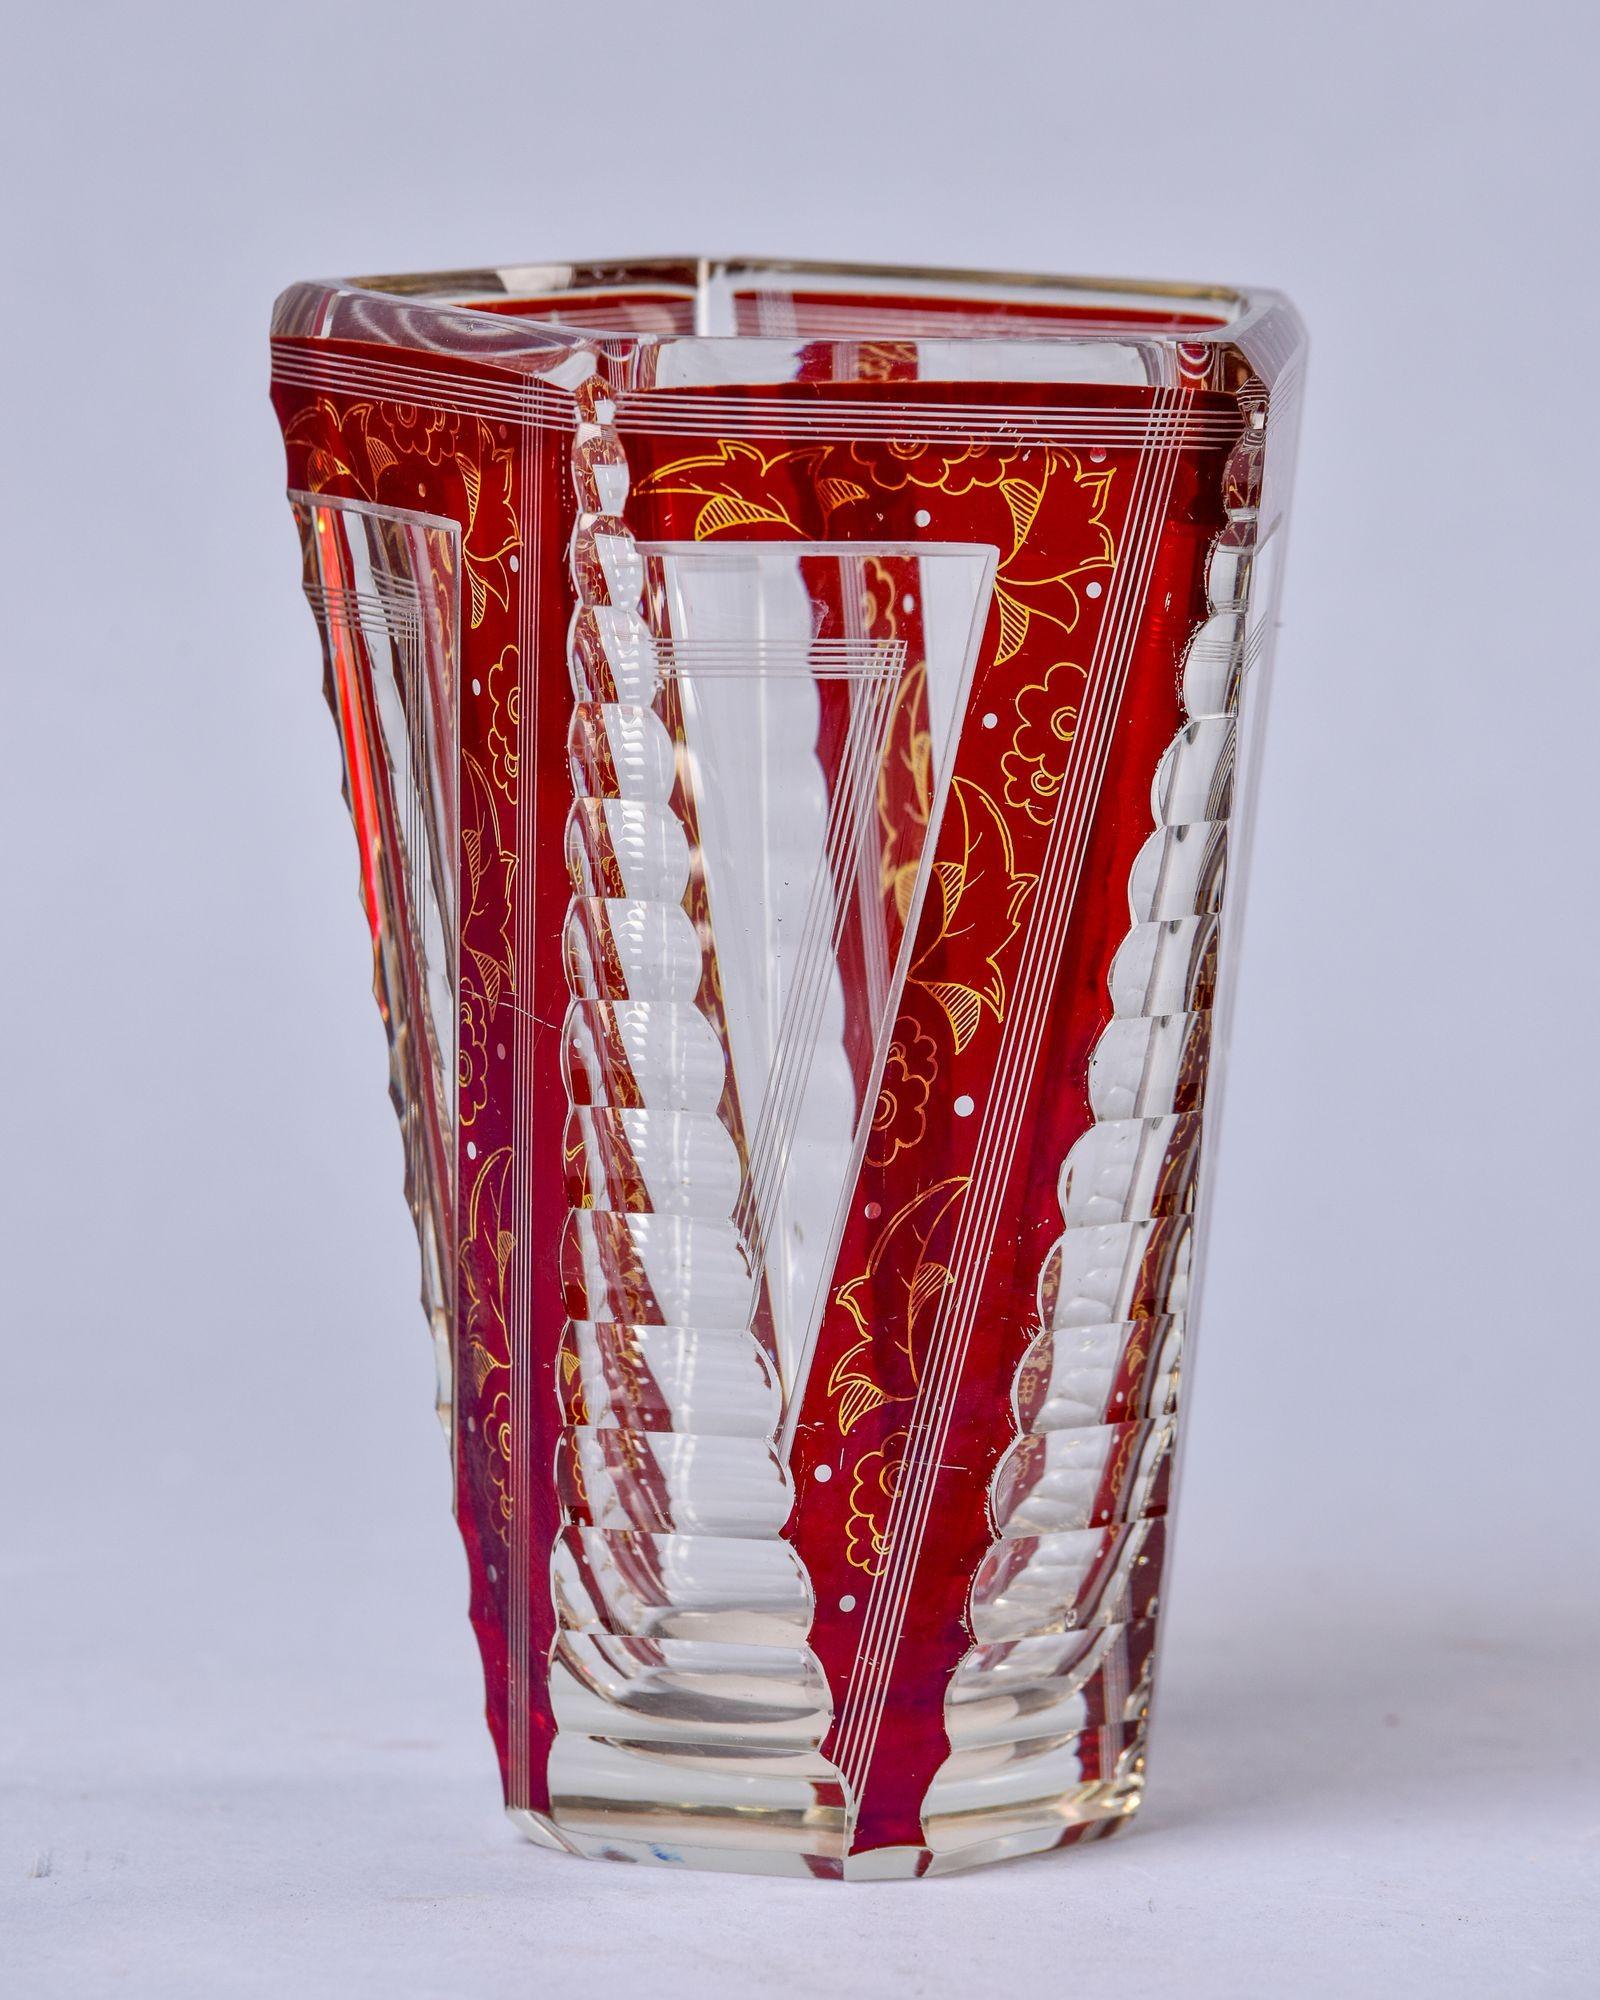 Circa 1930s Bohemian glass vase in tapered five panel shape with cut to red detailed design at panel borders. Unknown maker.